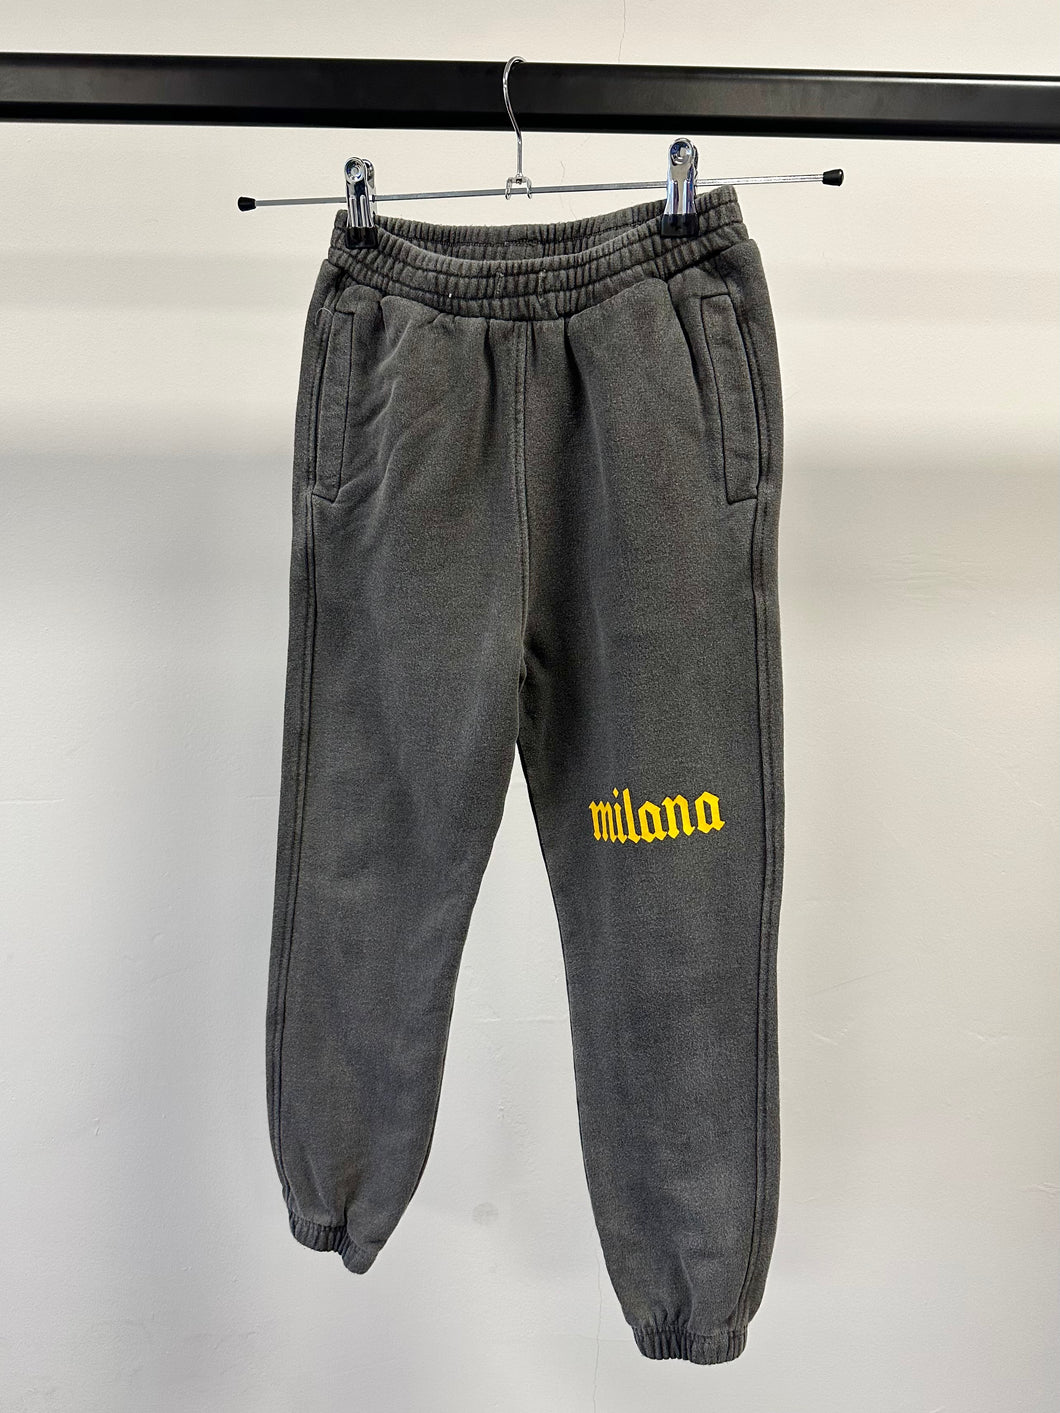 Washed Charcoal Graphic Sweatpants.